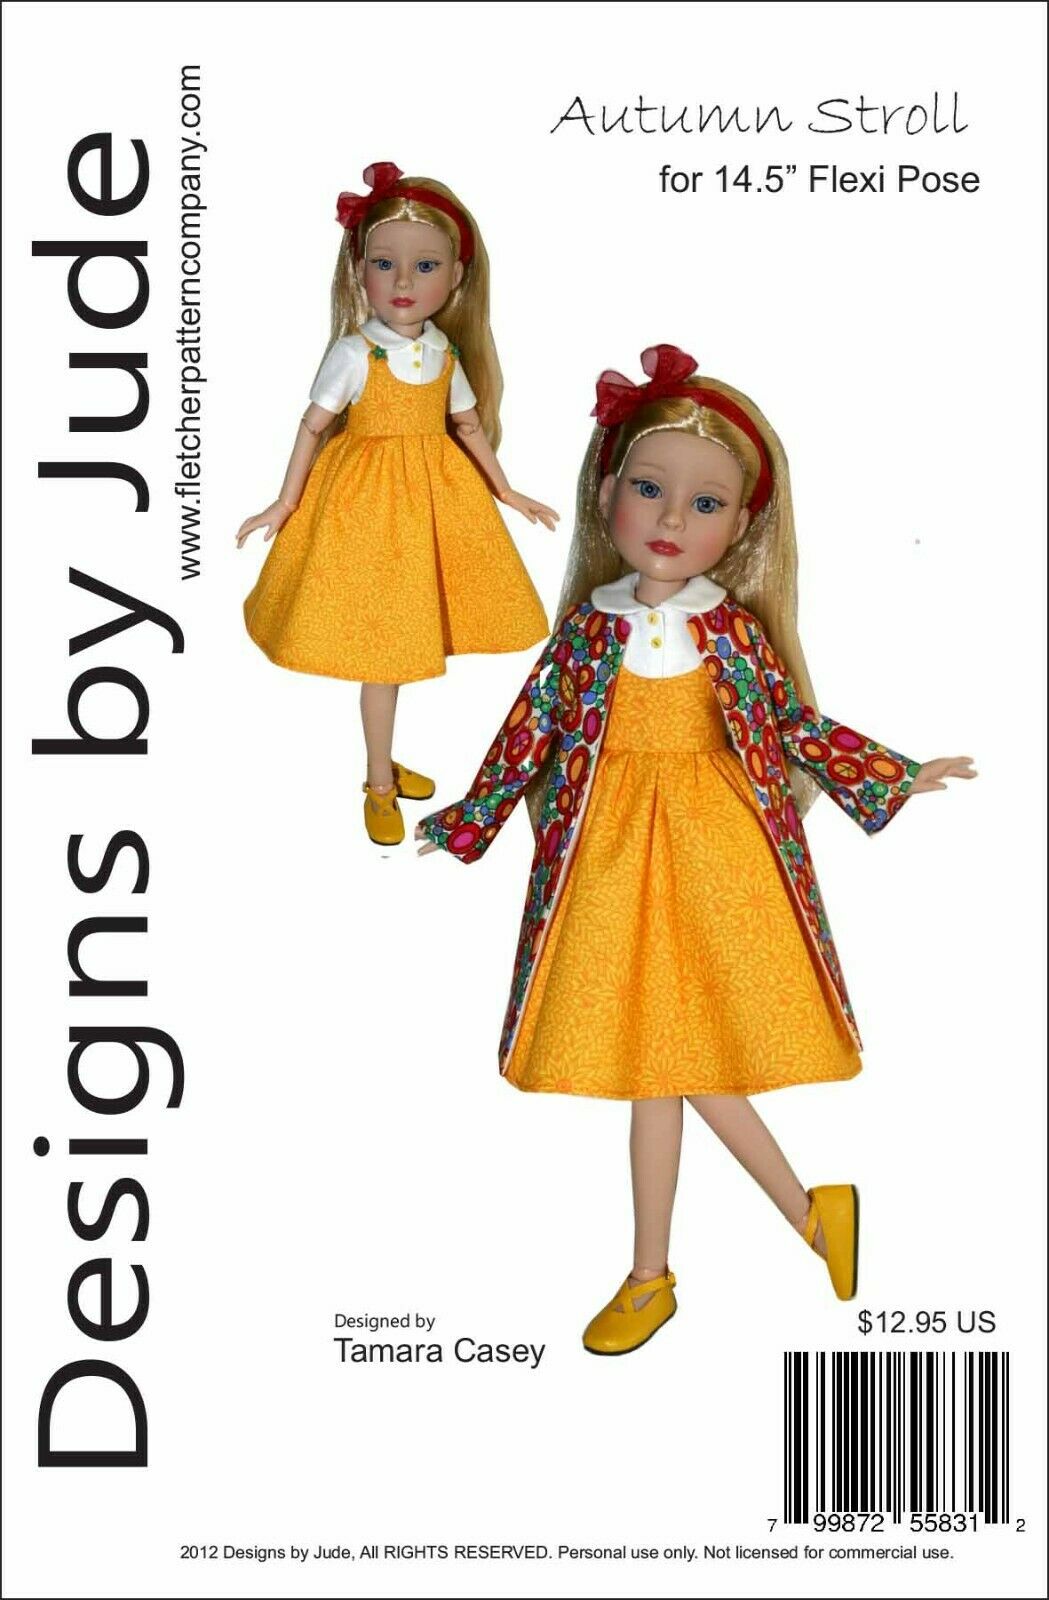 Autumn Stroll Doll Clothes Sewing Pattern For 14.5" Flexi Pose Tonner